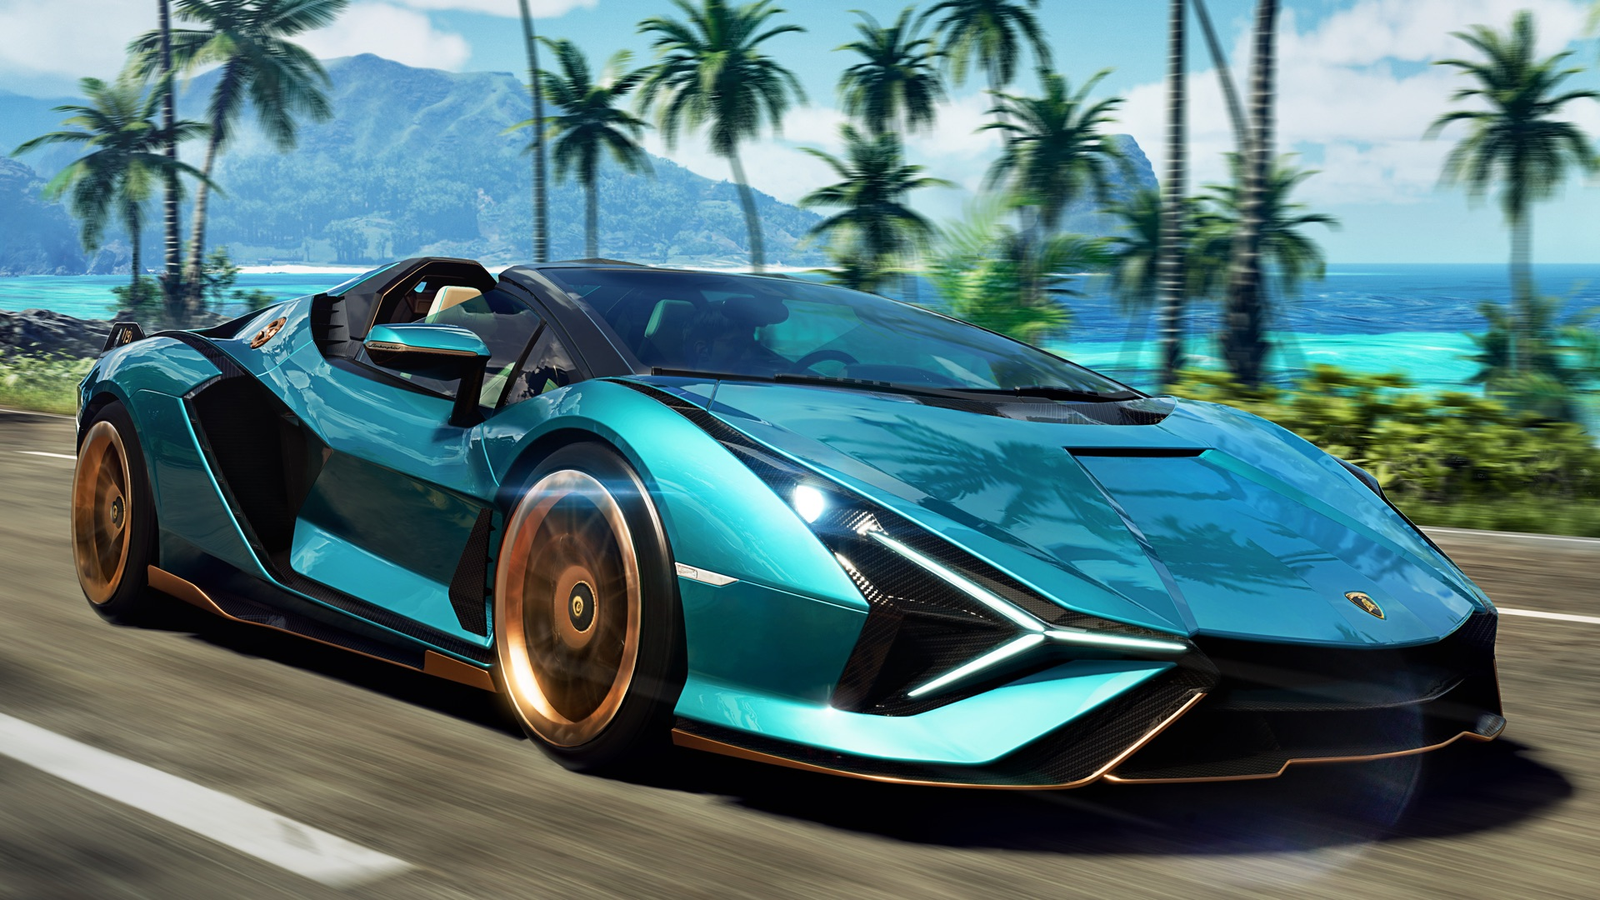 Ubisoft's The Crew Motorfest will not be available on Steam at